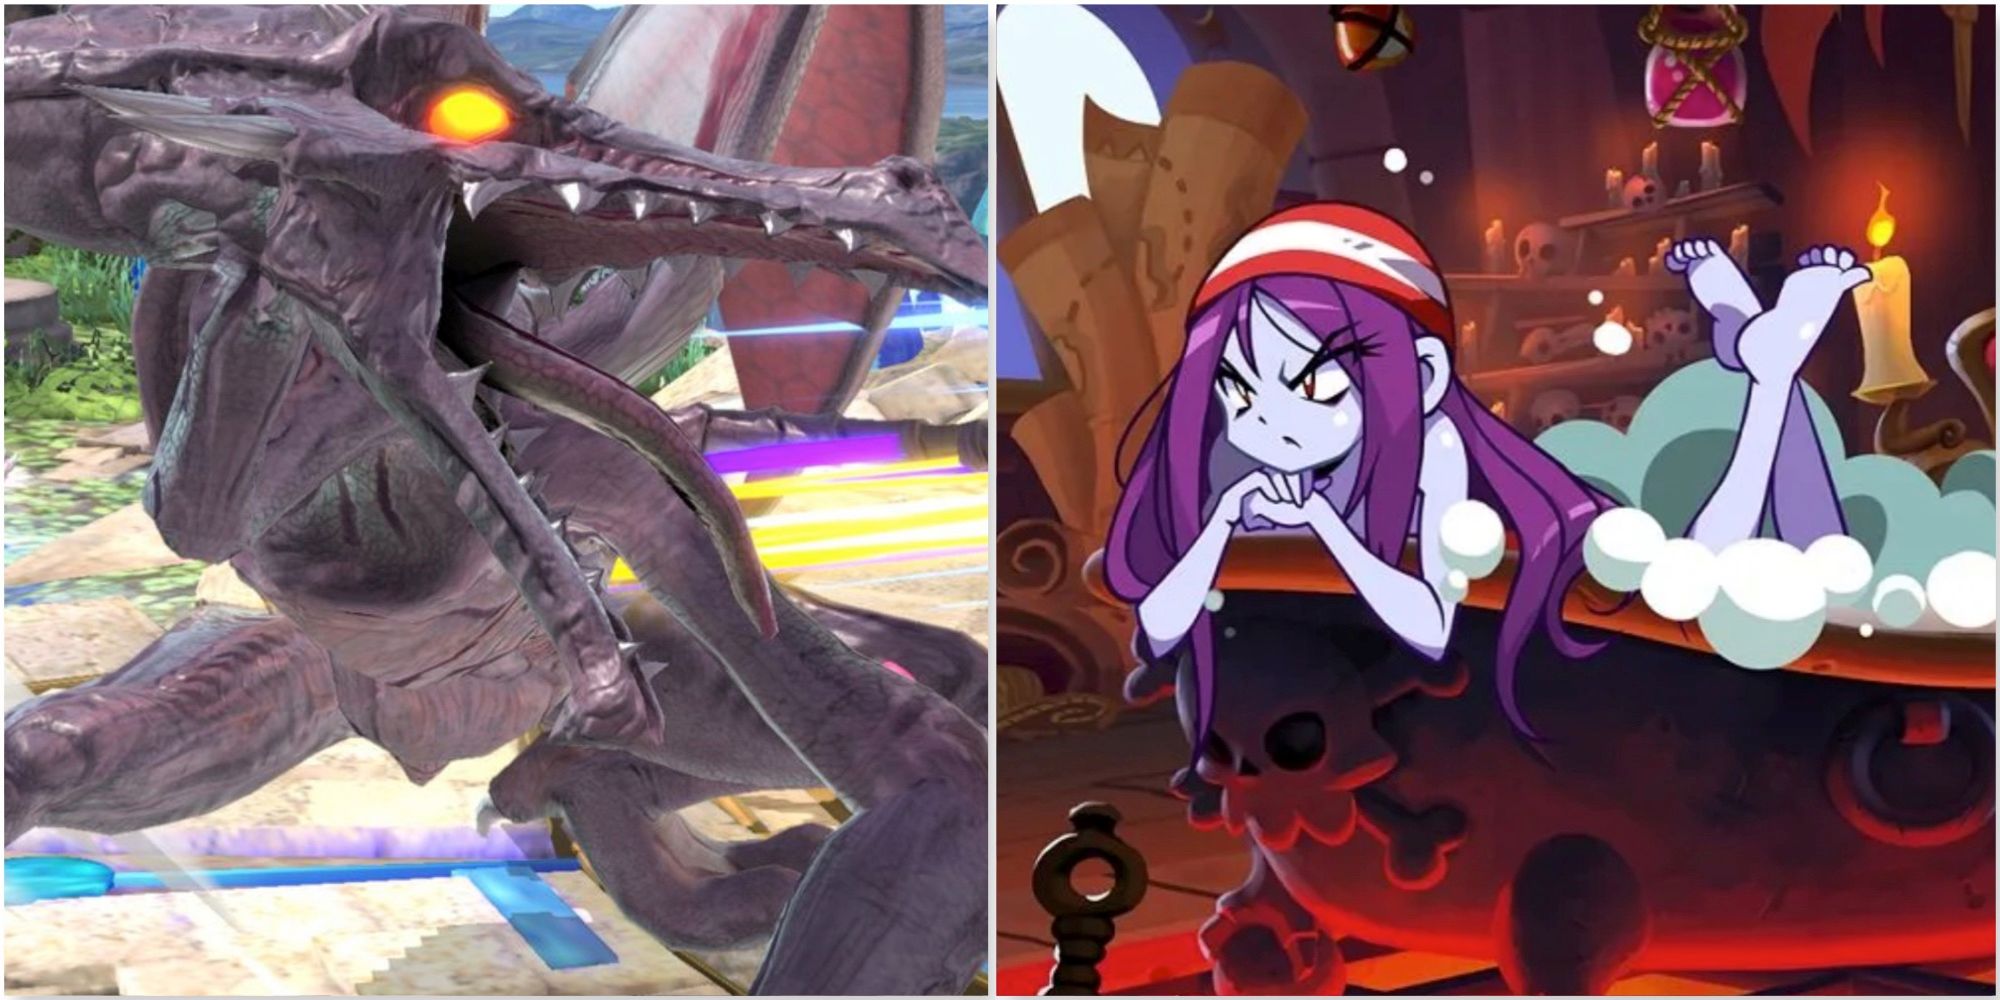 Ridley in Super Smash Bros. Ultimate and Risky Boots taking a bath in Shantae Half-Genie Hero